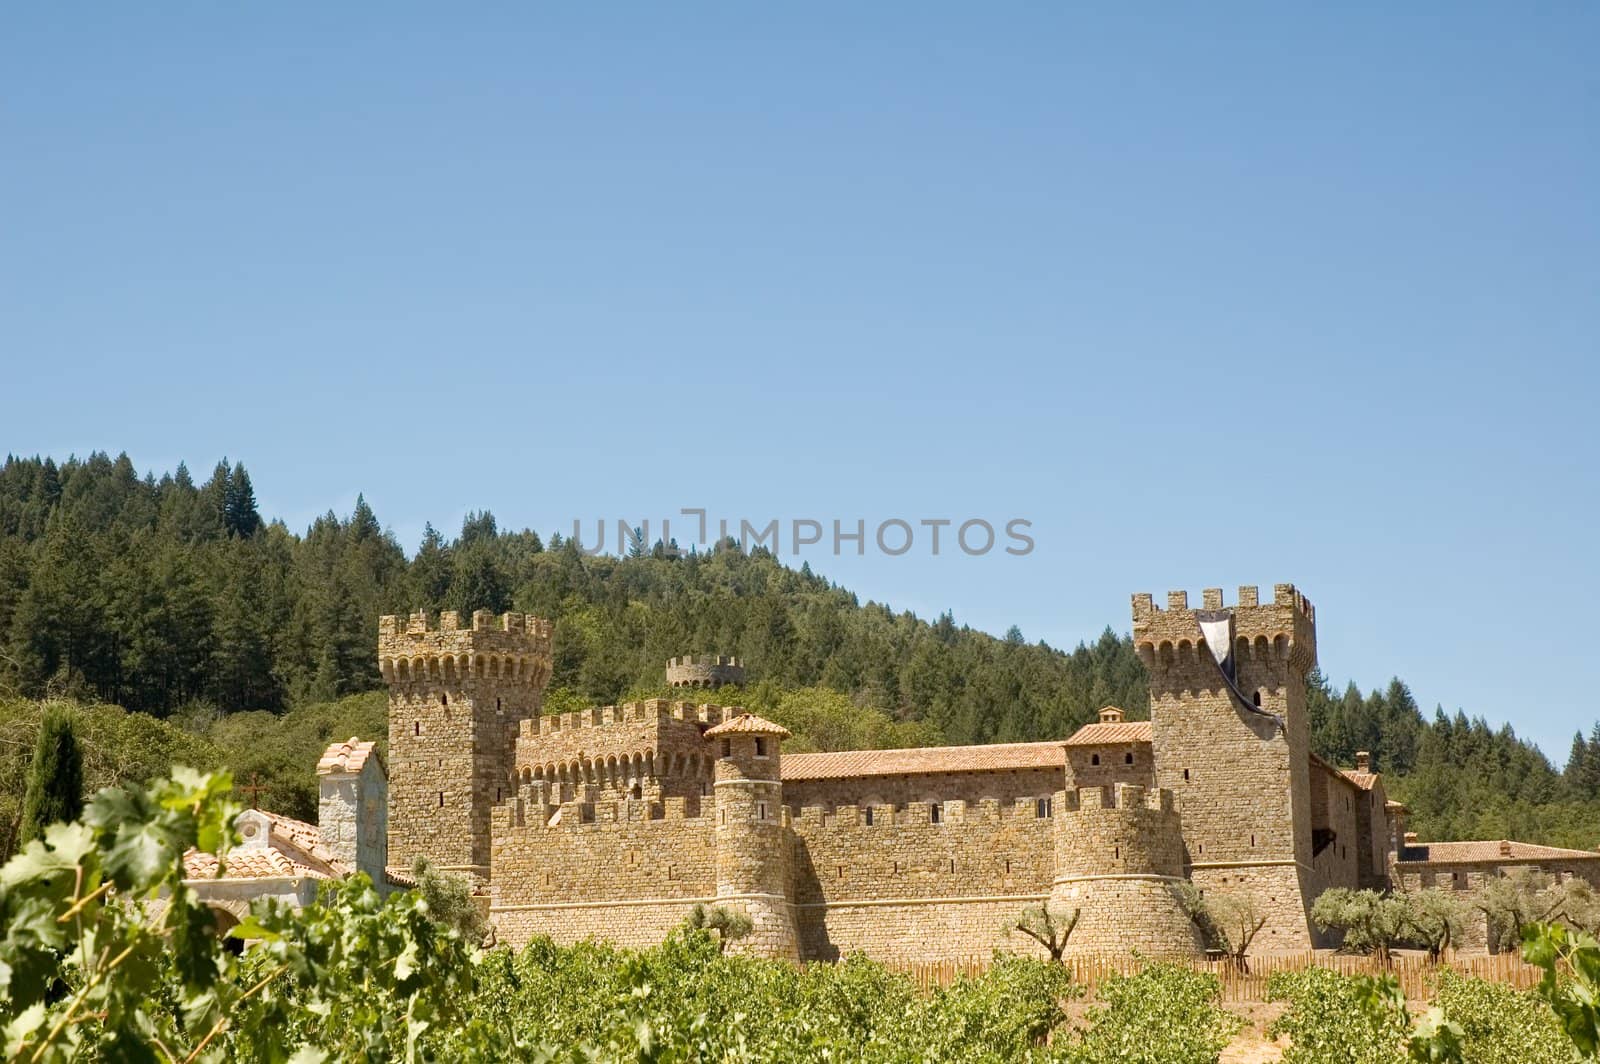 Copy of a Medieval Tuscan castle in a terraced vineyard in the hills of Northern California 